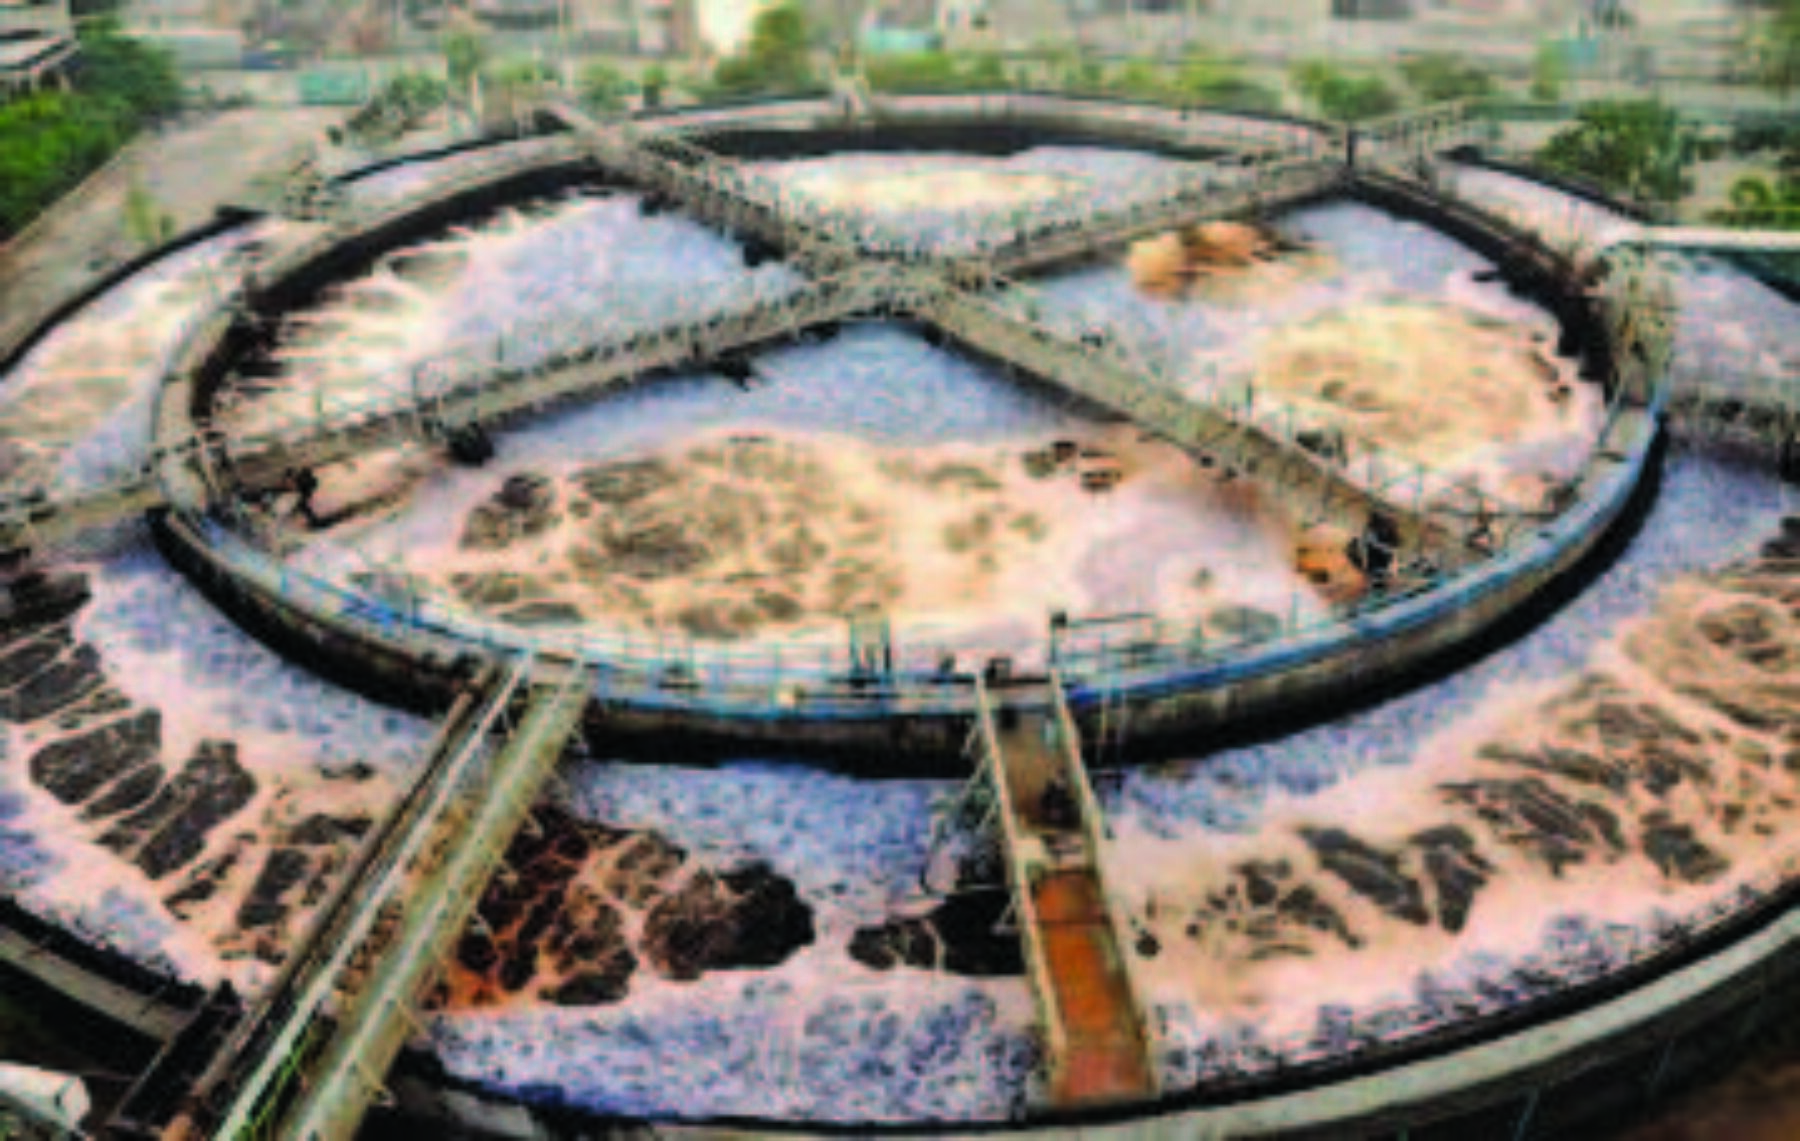 An aerial view of a green treatment process consisting of a large volume of water contained in two rings with aeration technologies agitating the water with platforms forming an x across the top of the center pool of water